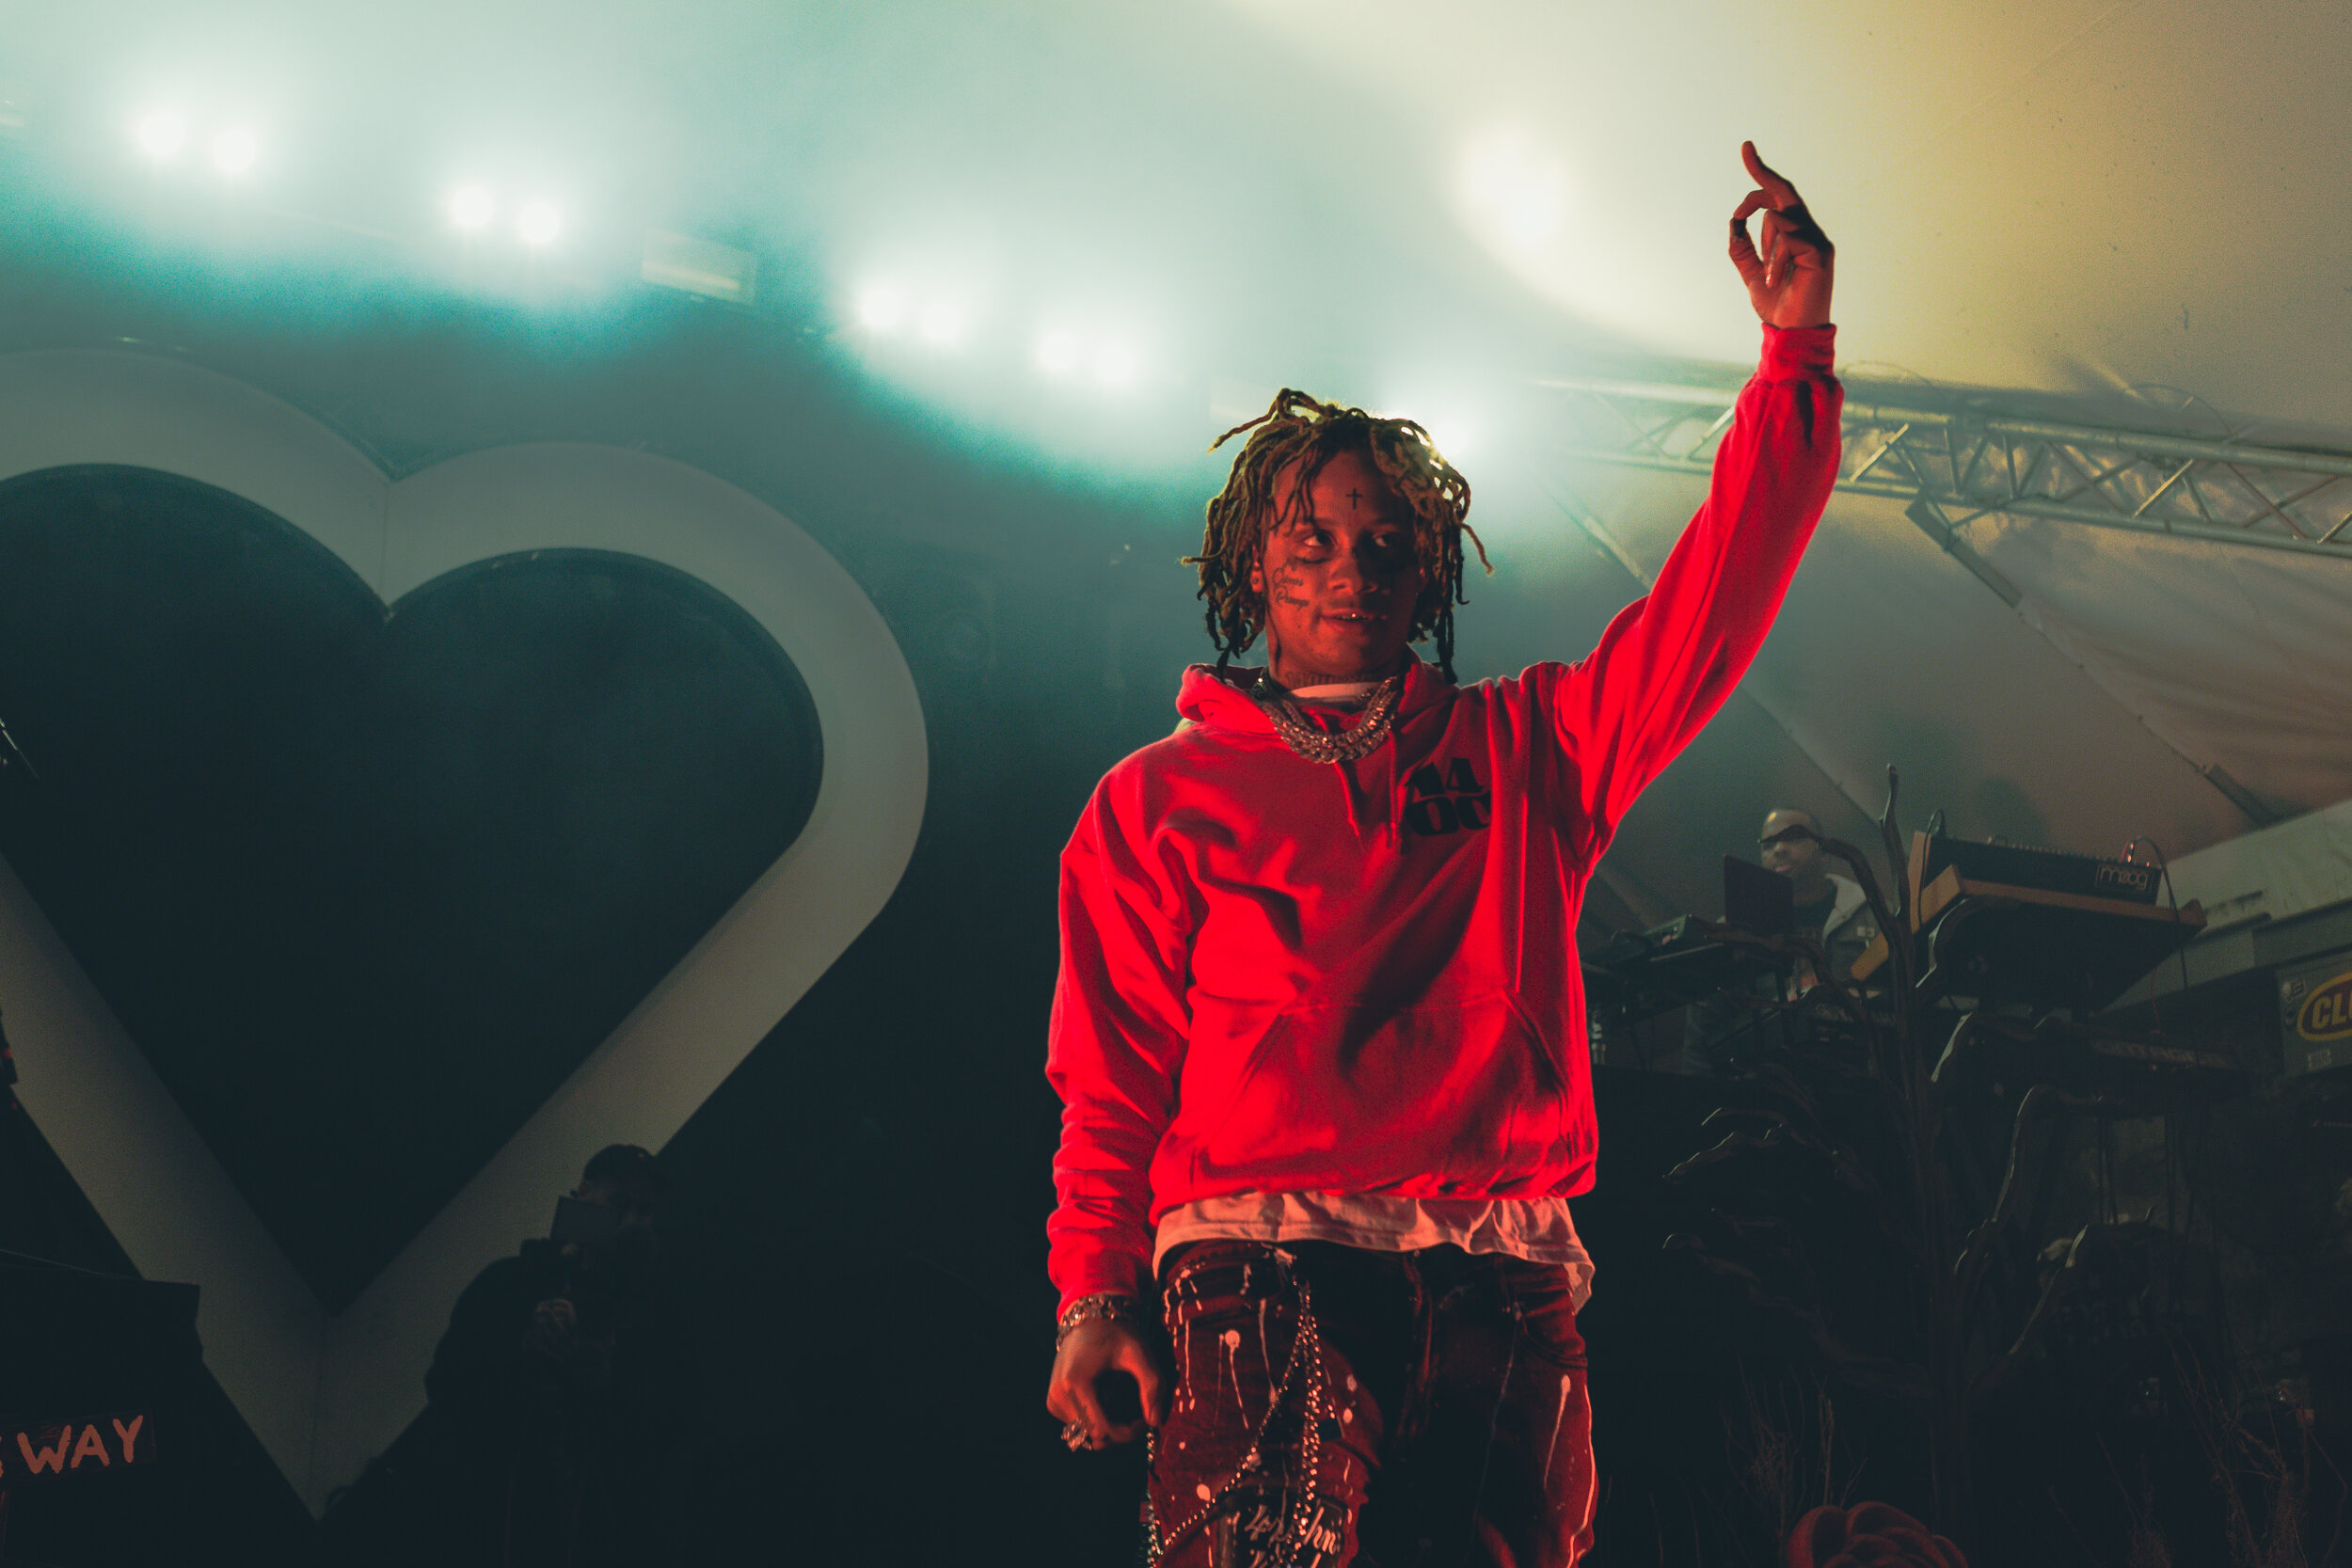  Trippie Redd takes the stage and hypes up the crowd. He is currently promoting his 4th mixtape entitled  A Love Letter to You 4,  and will head to Europe after his North American tour. 